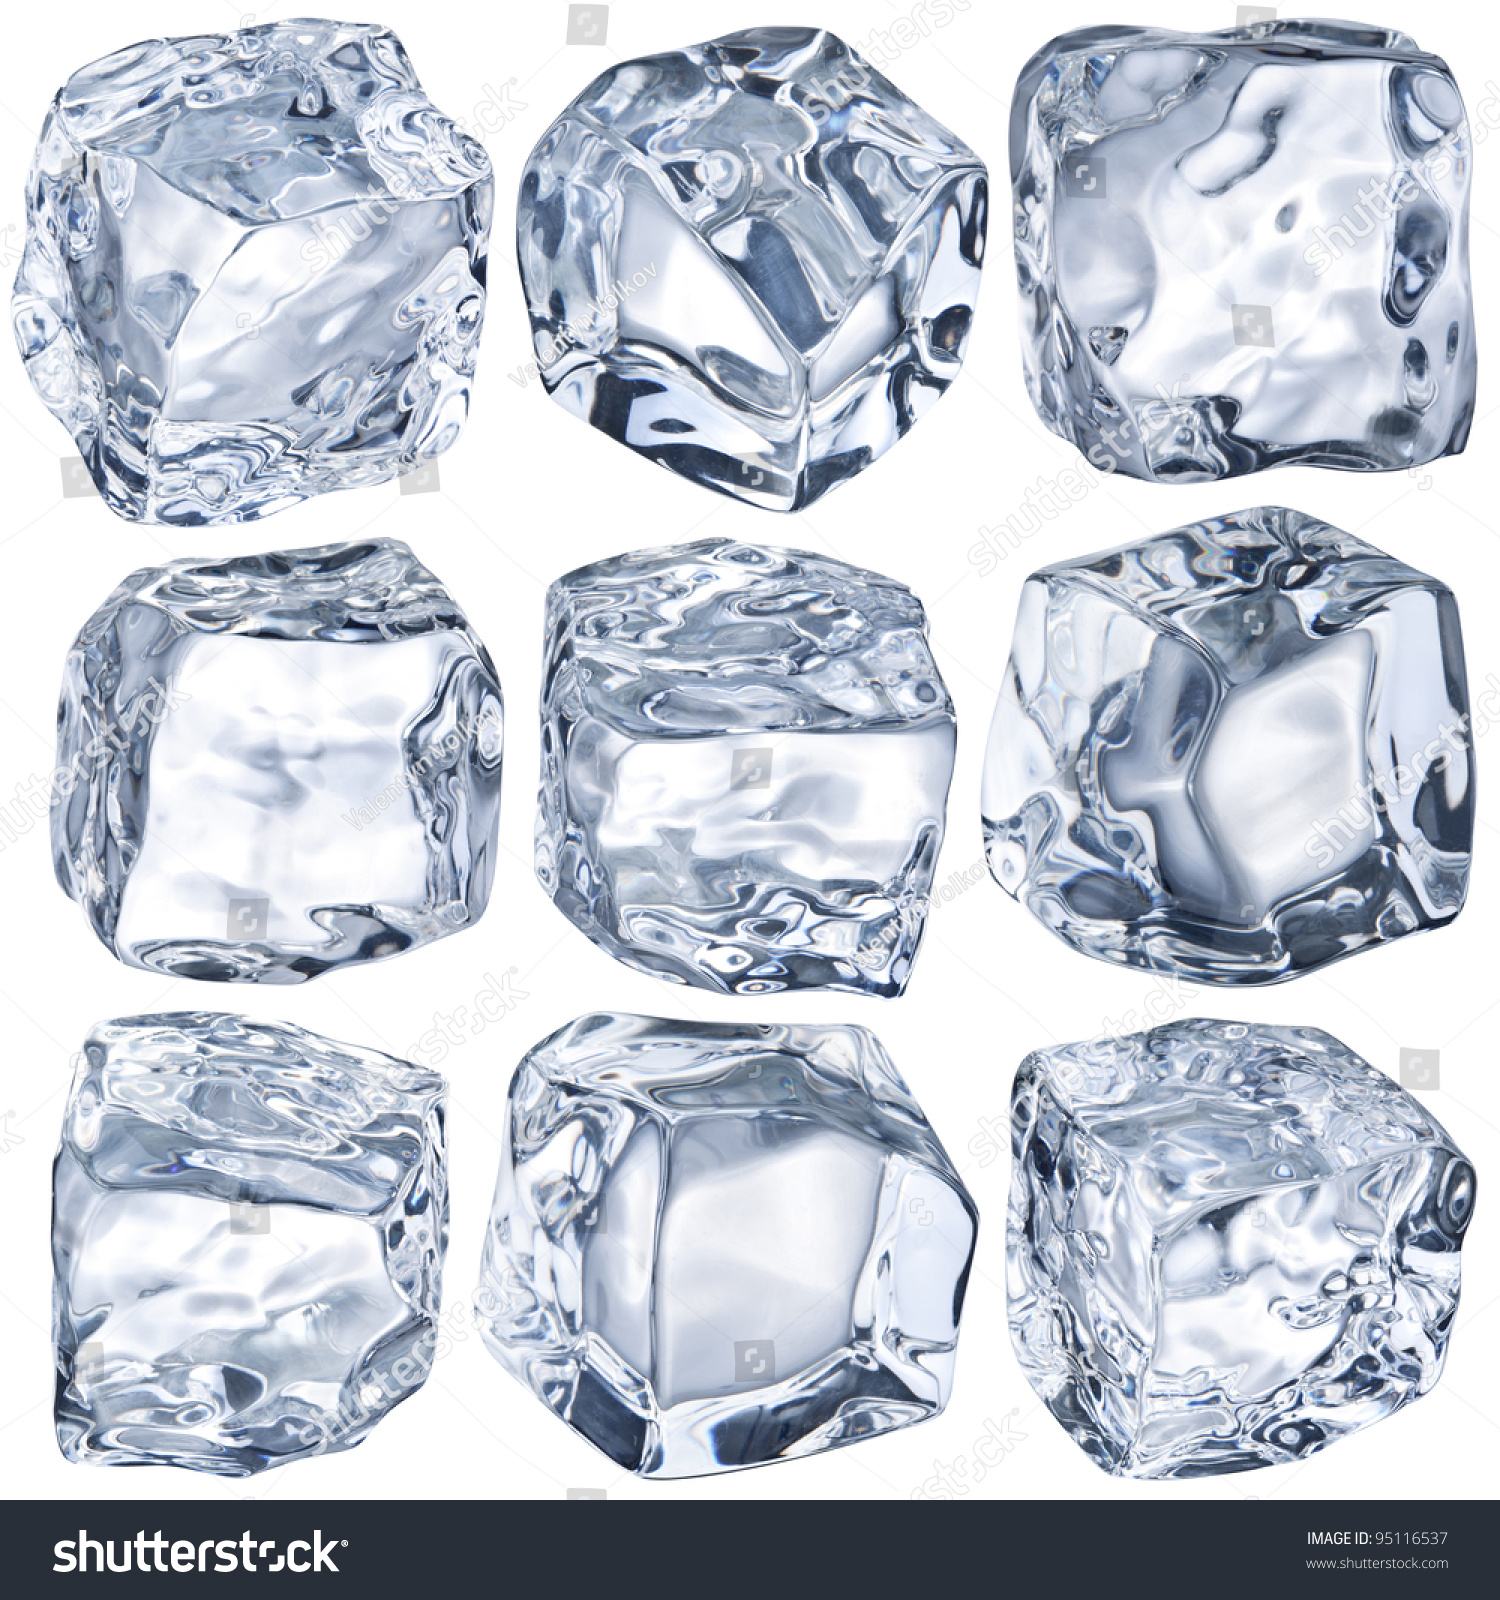 Ice cubes on a white background. File contains clipping path. #95116537